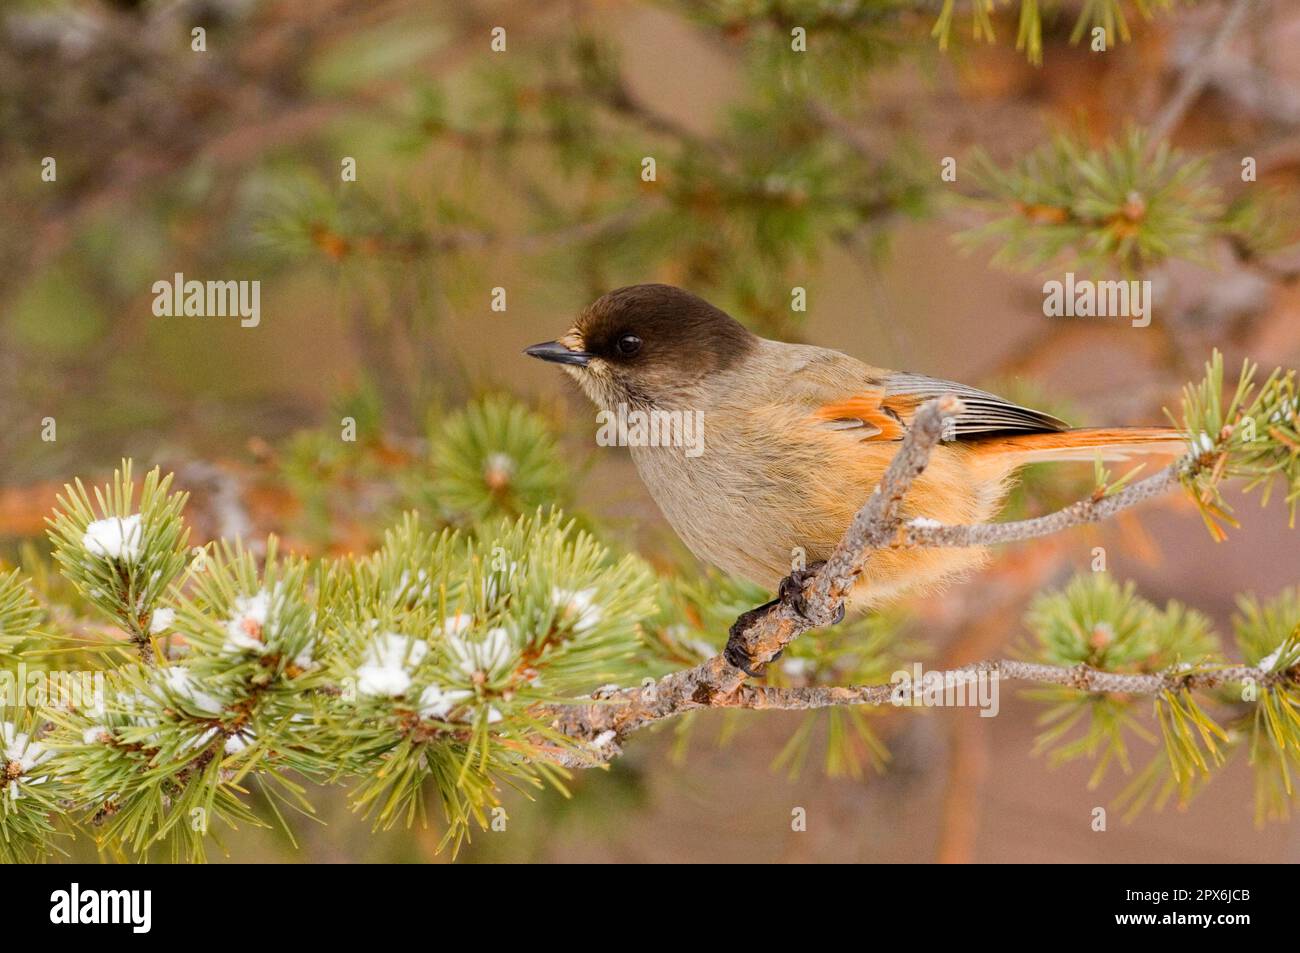 Siberian jay (Perisoreus infaustus), corvids, songbirds, animals, birds, Siberian Jay adult, perched on snow covered twig in coniferous forest Stock Photo